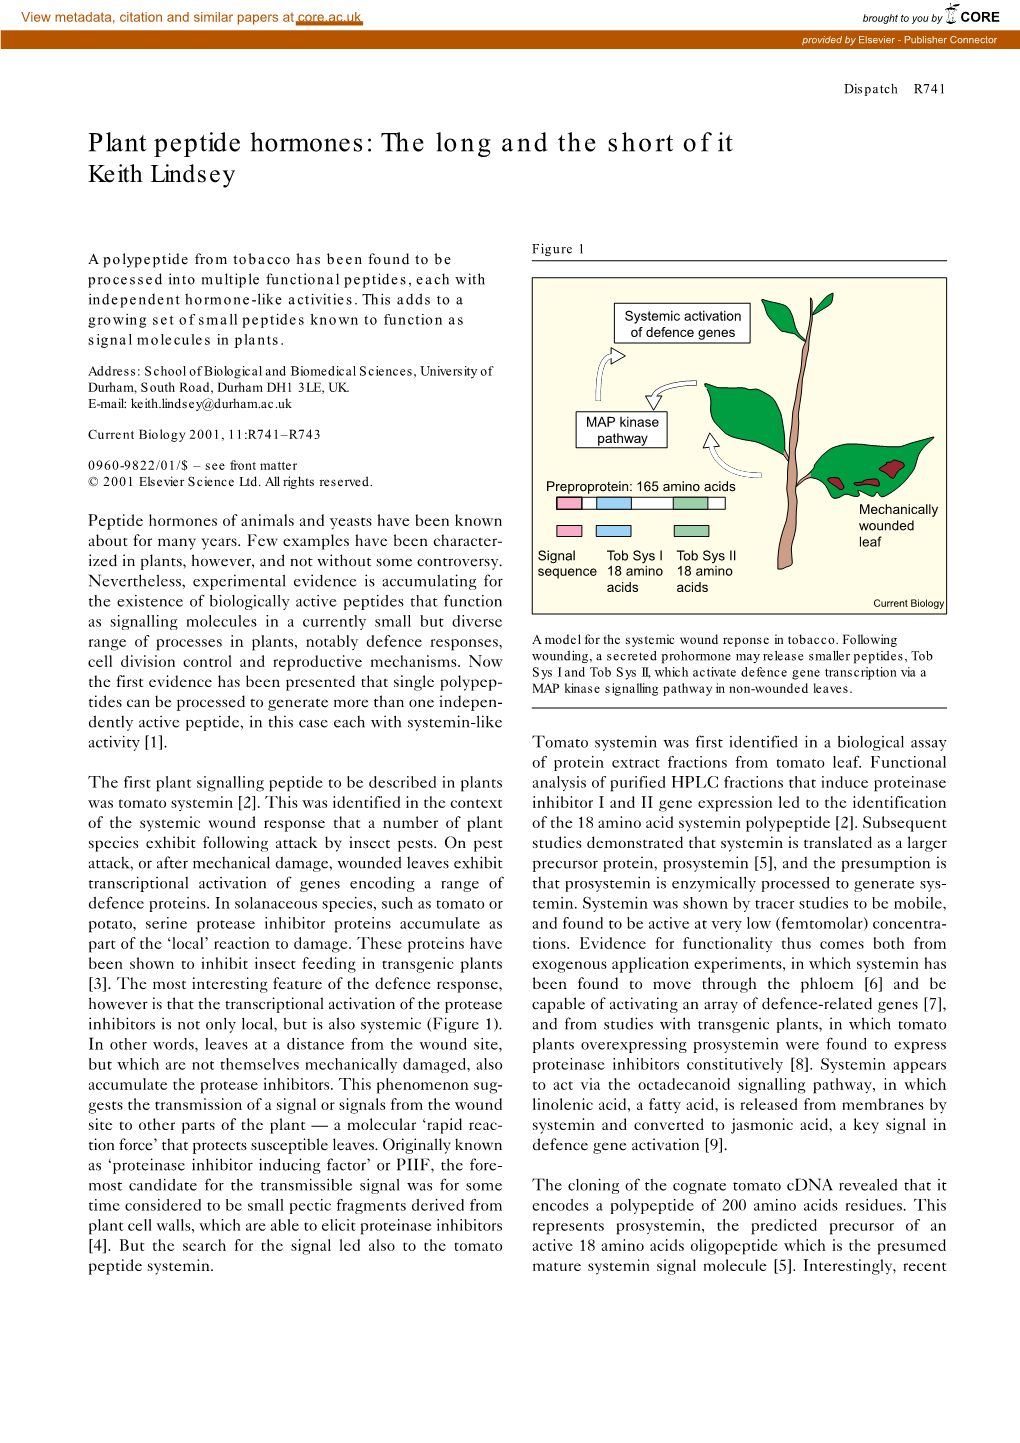 Plant Peptide Hormones: the Long and the Short of It Keith Lindsey